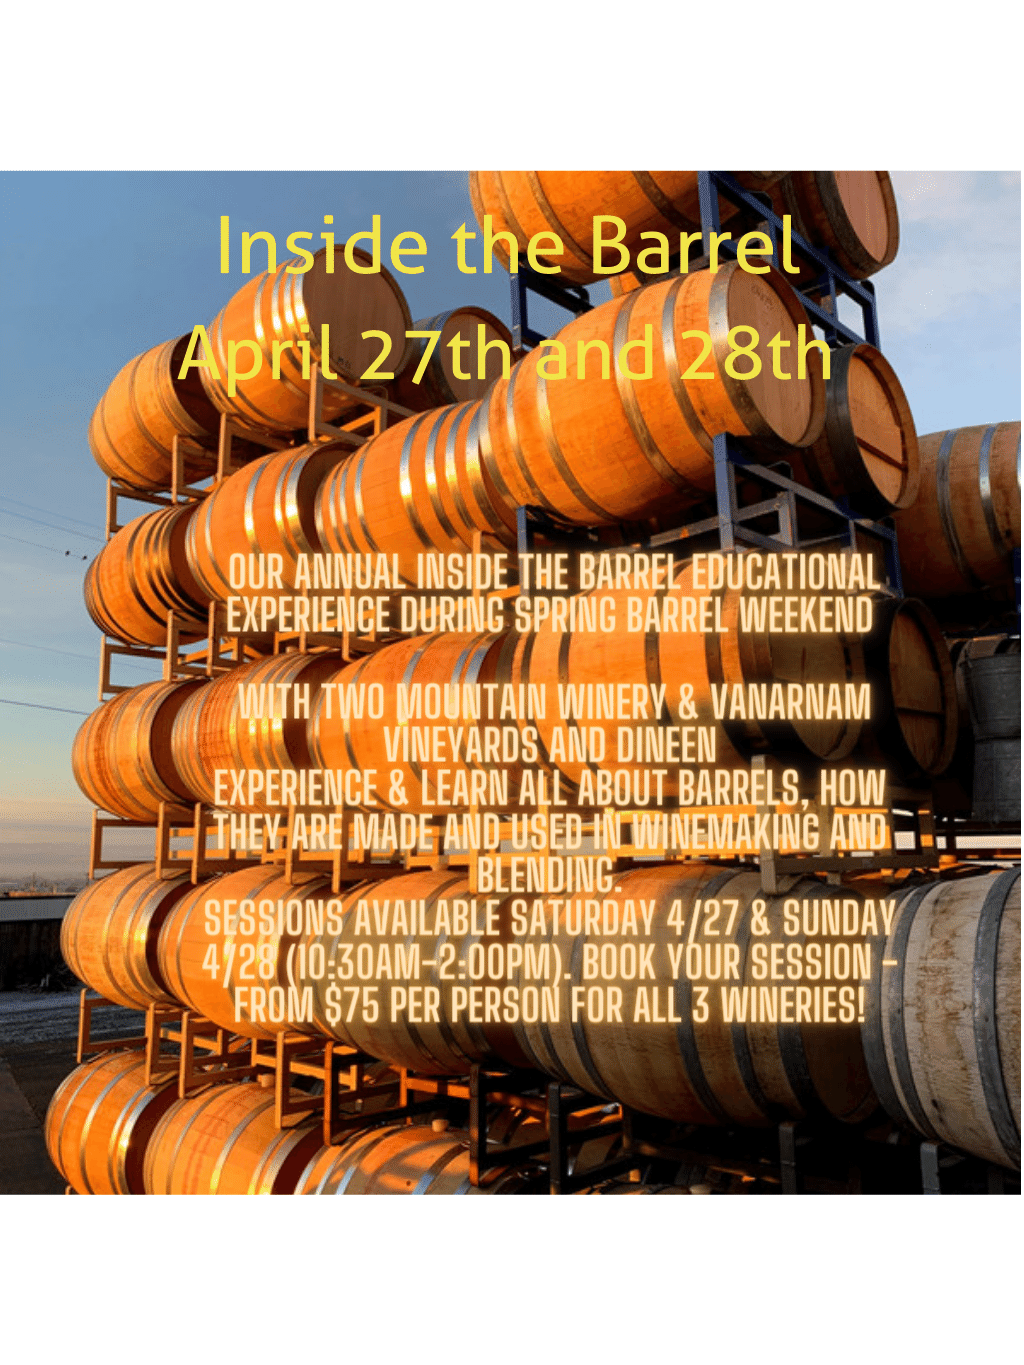 Product Image for Inside the Barrel Sunday, April 28th